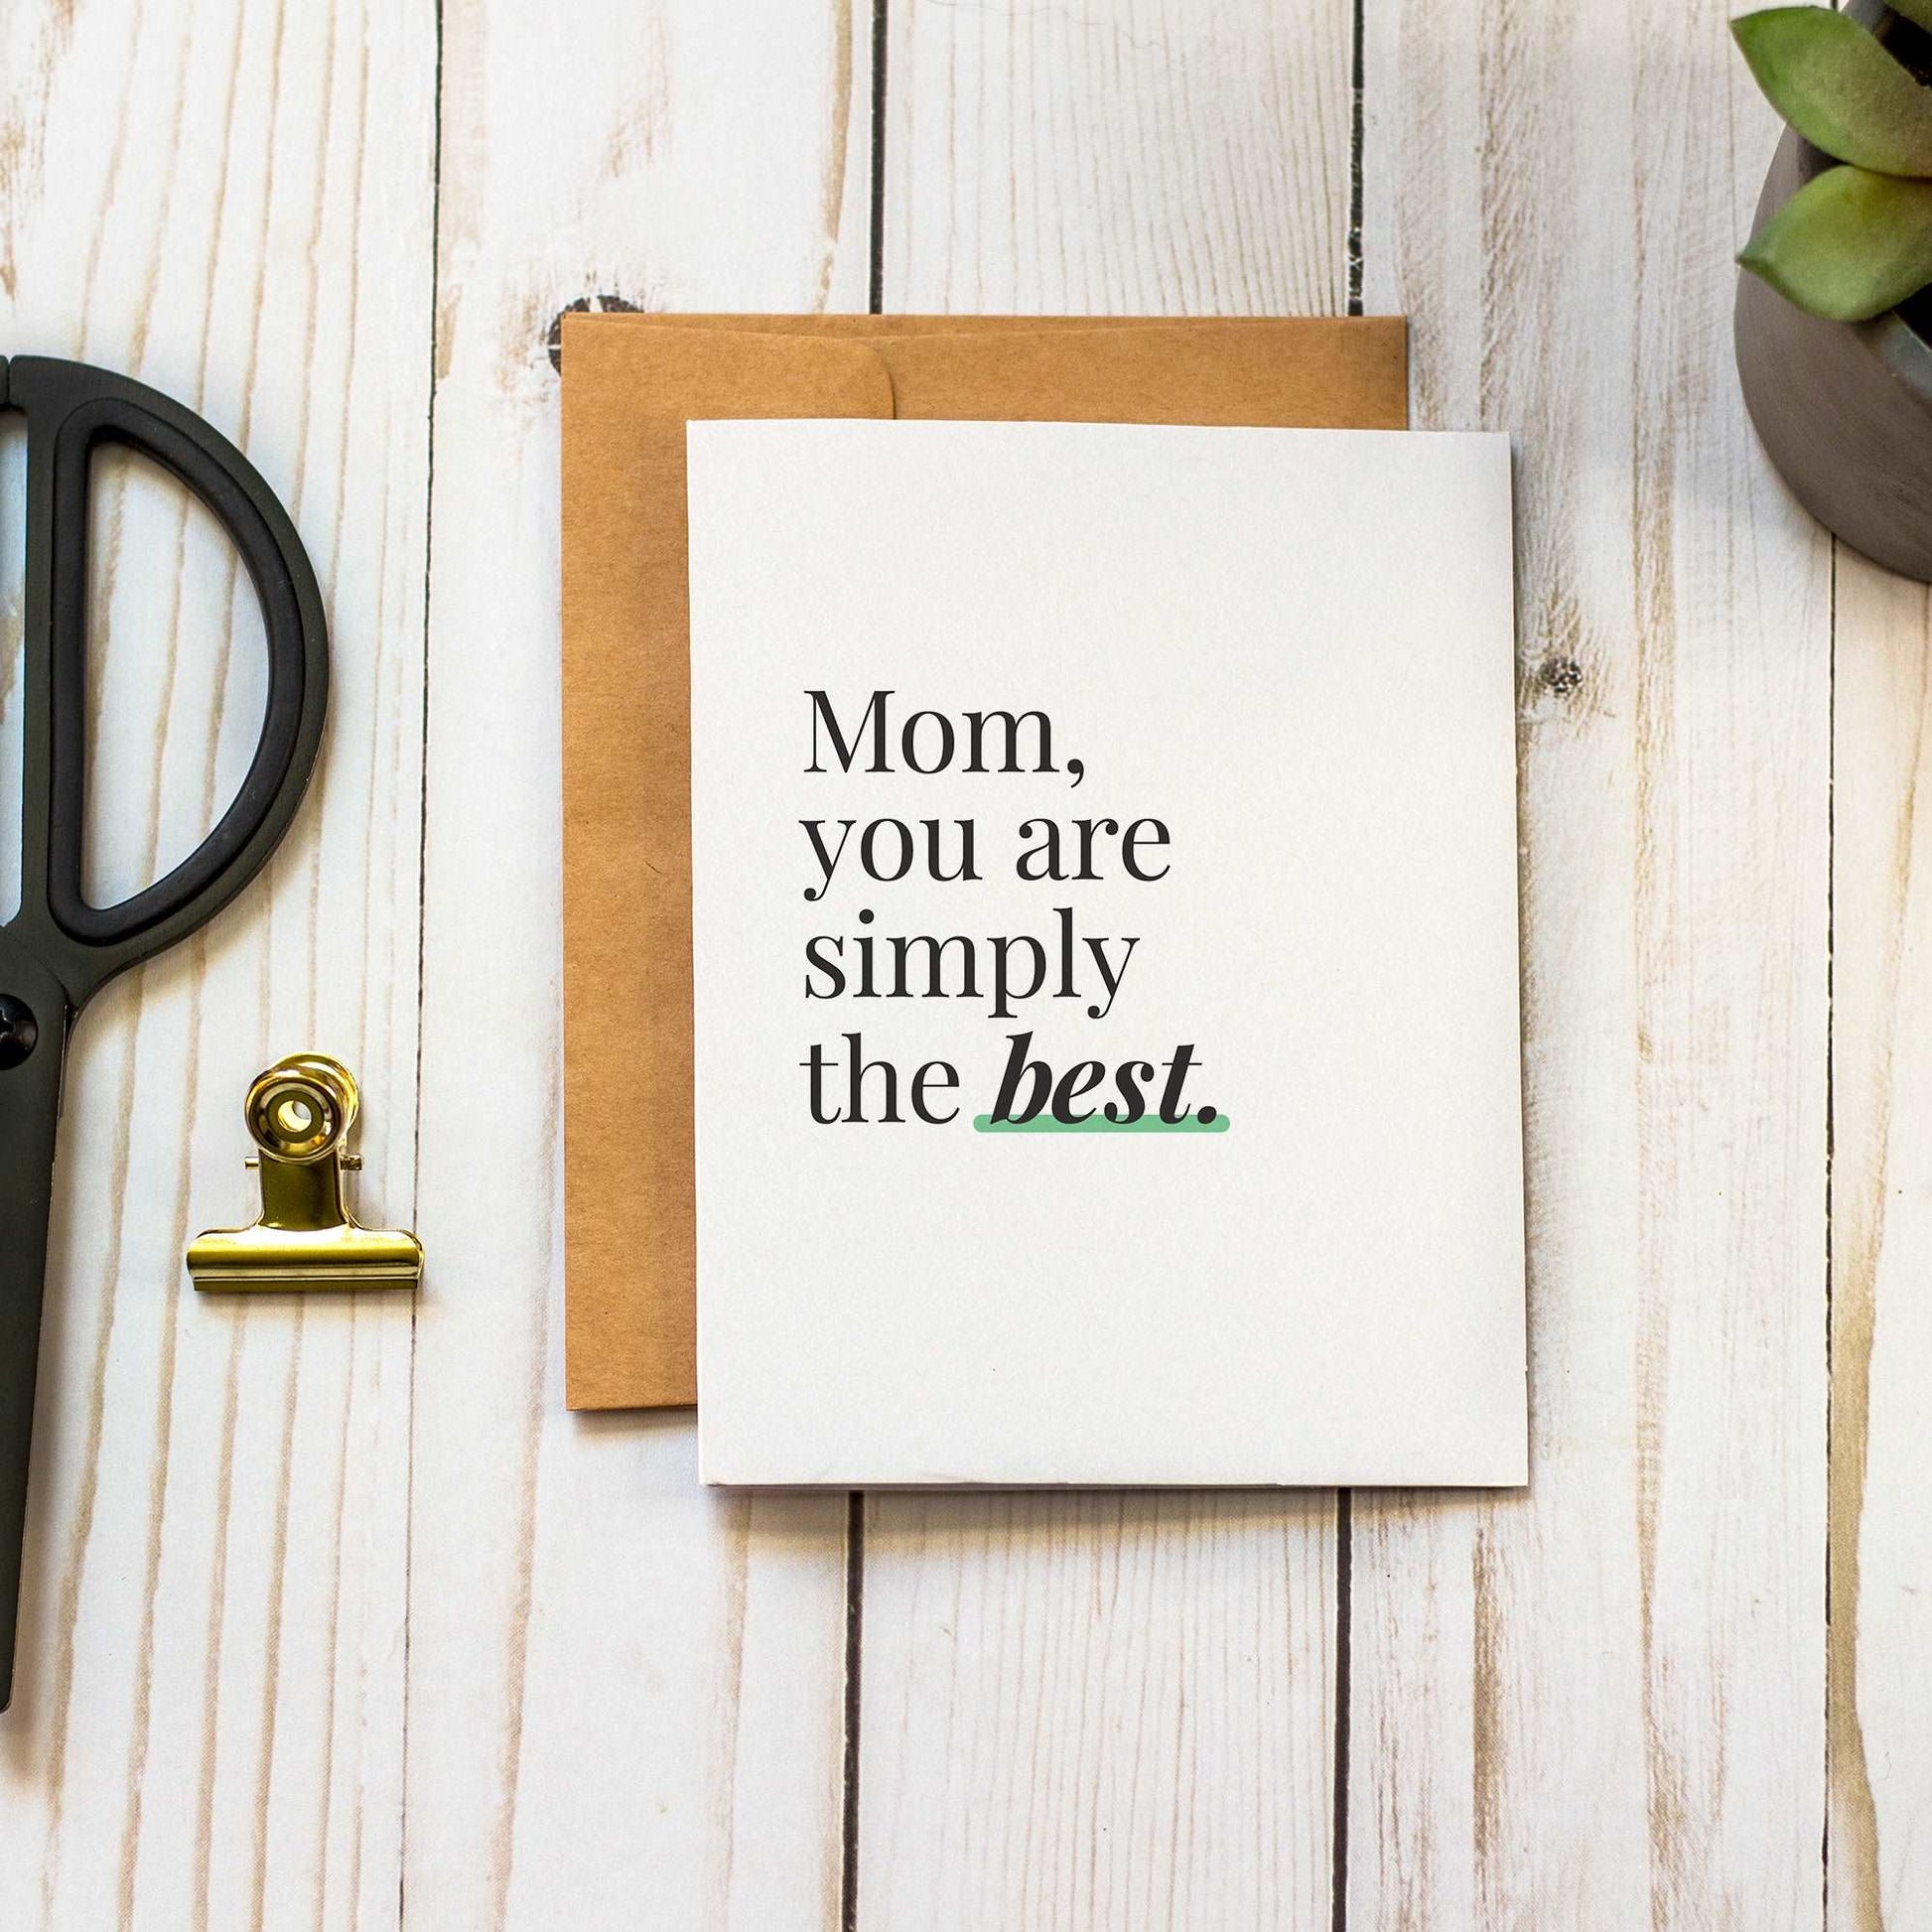 Mom, you are simply the best | Any Occasion Mother's Day Greeting Card